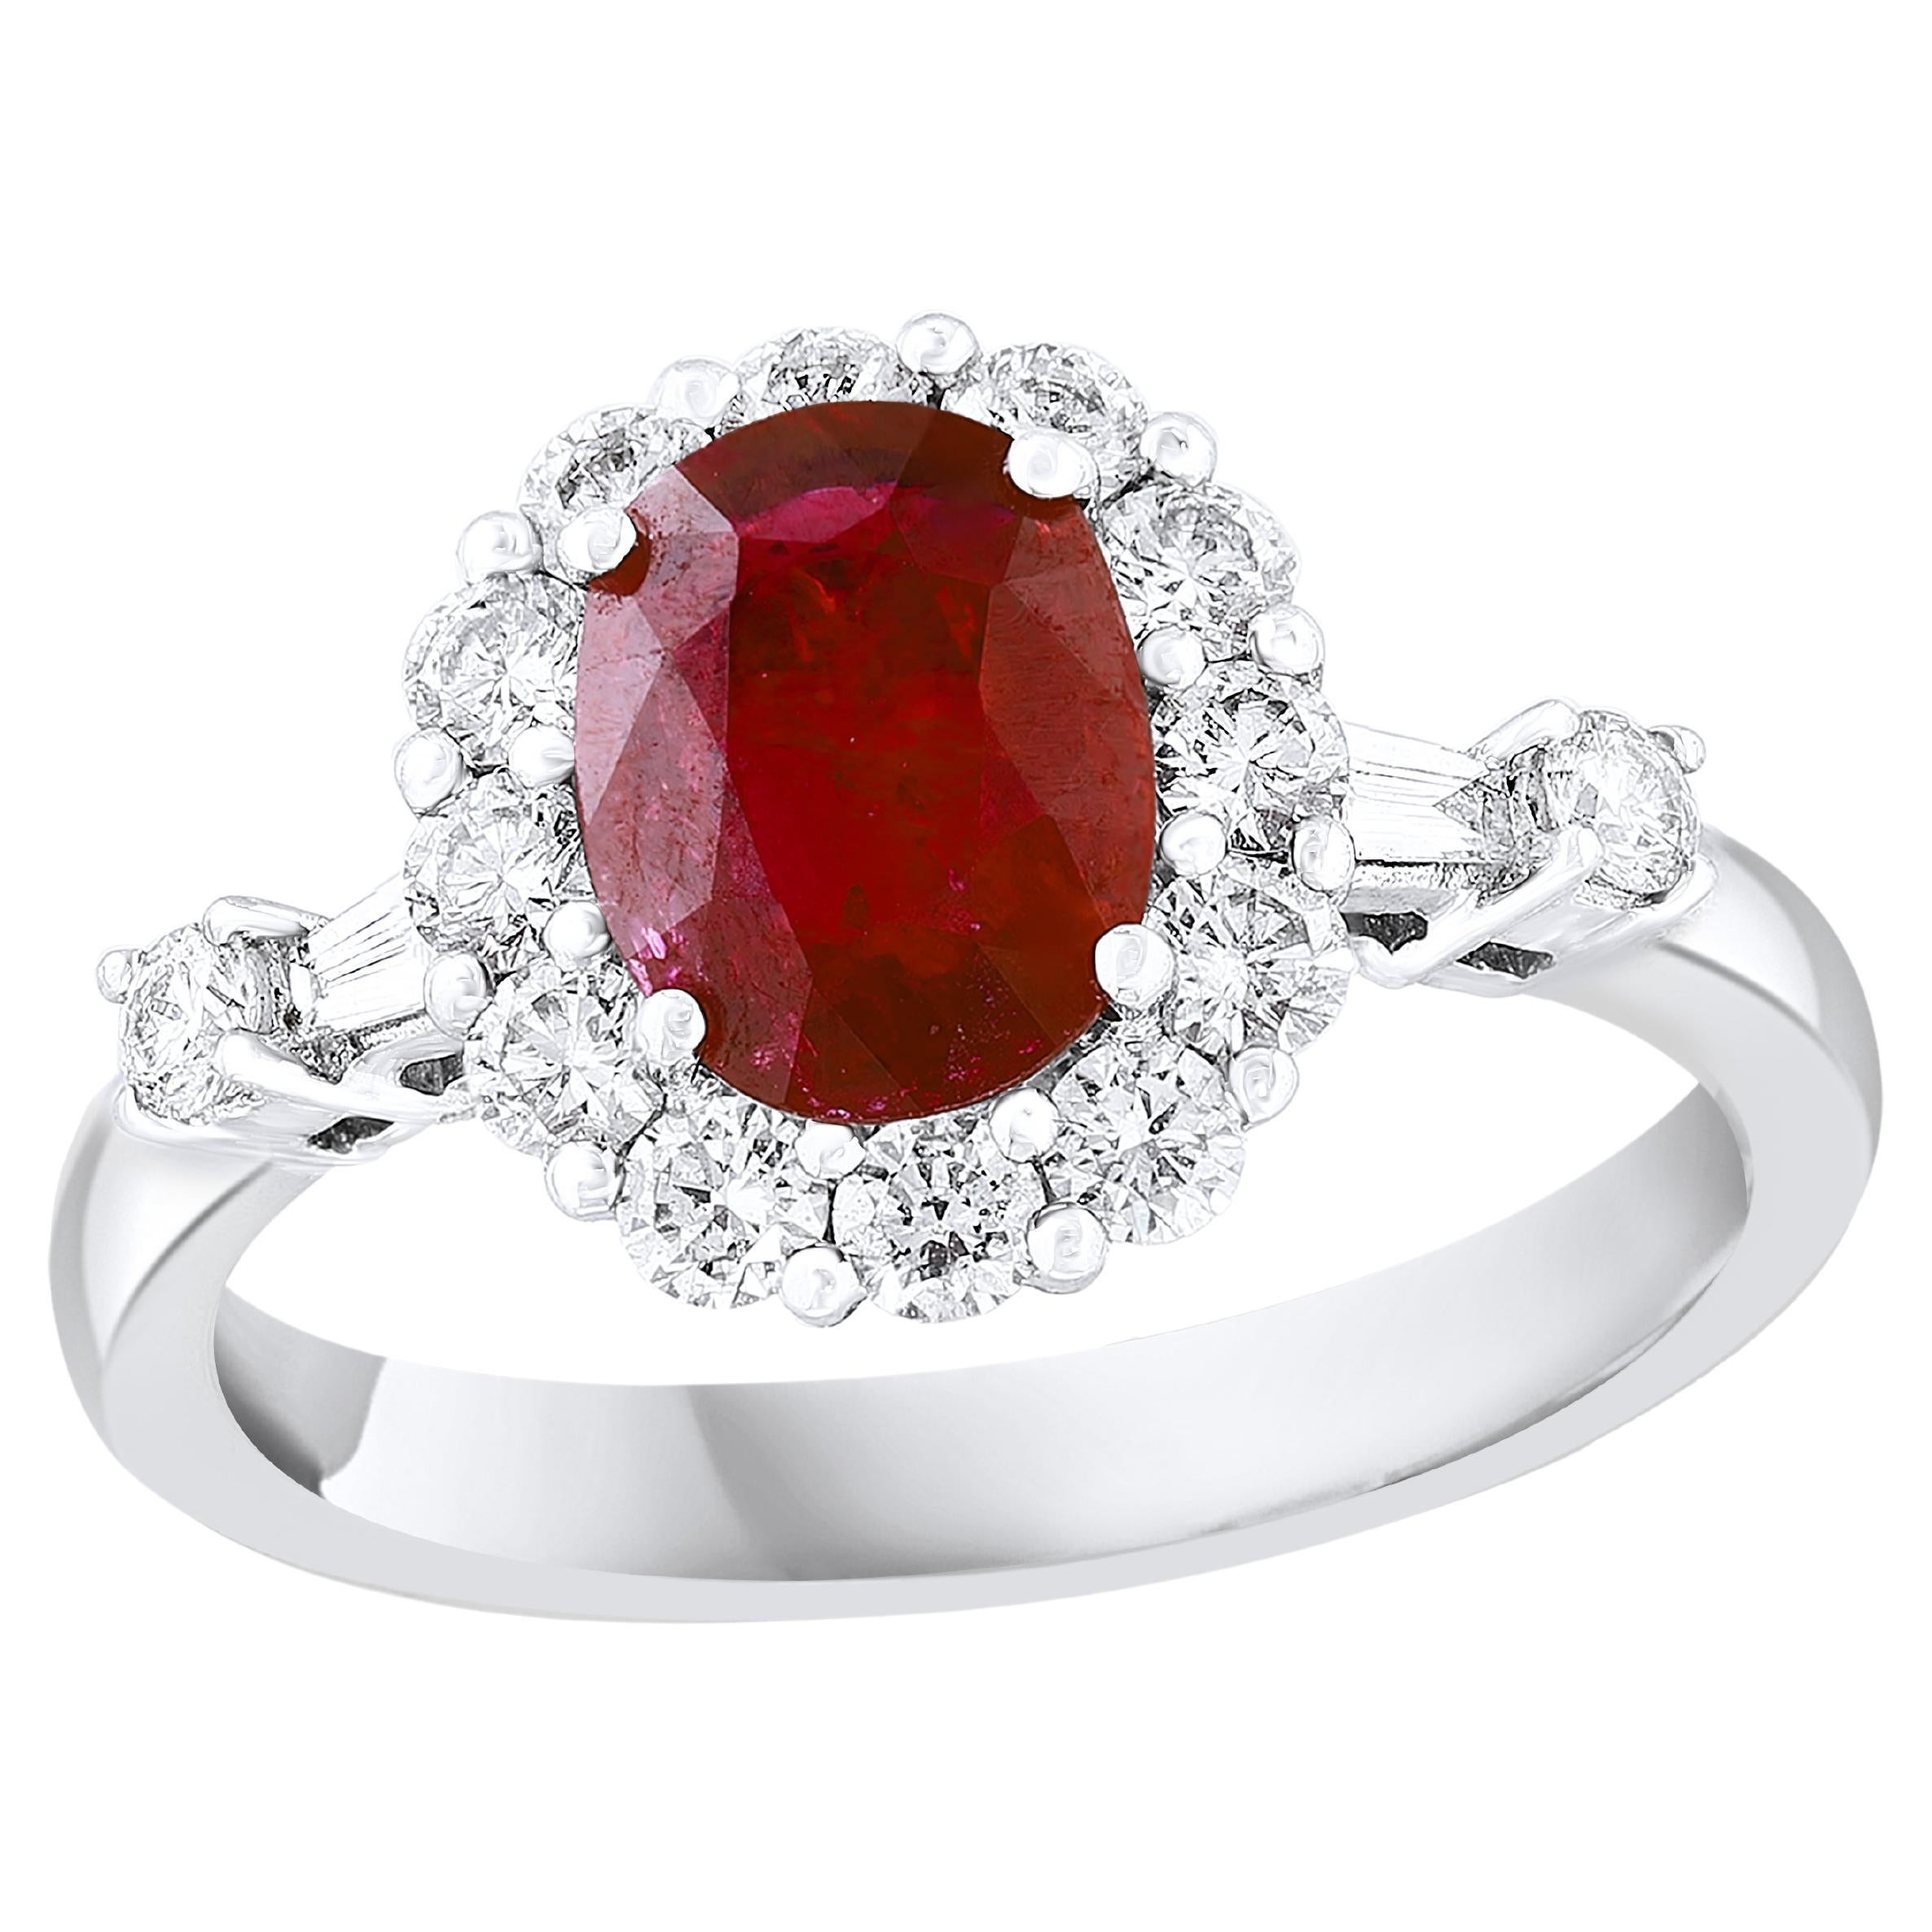 1.33 Carat Oval Cut Ruby and Diamond Engagement Ring in 18K White Gold For Sale